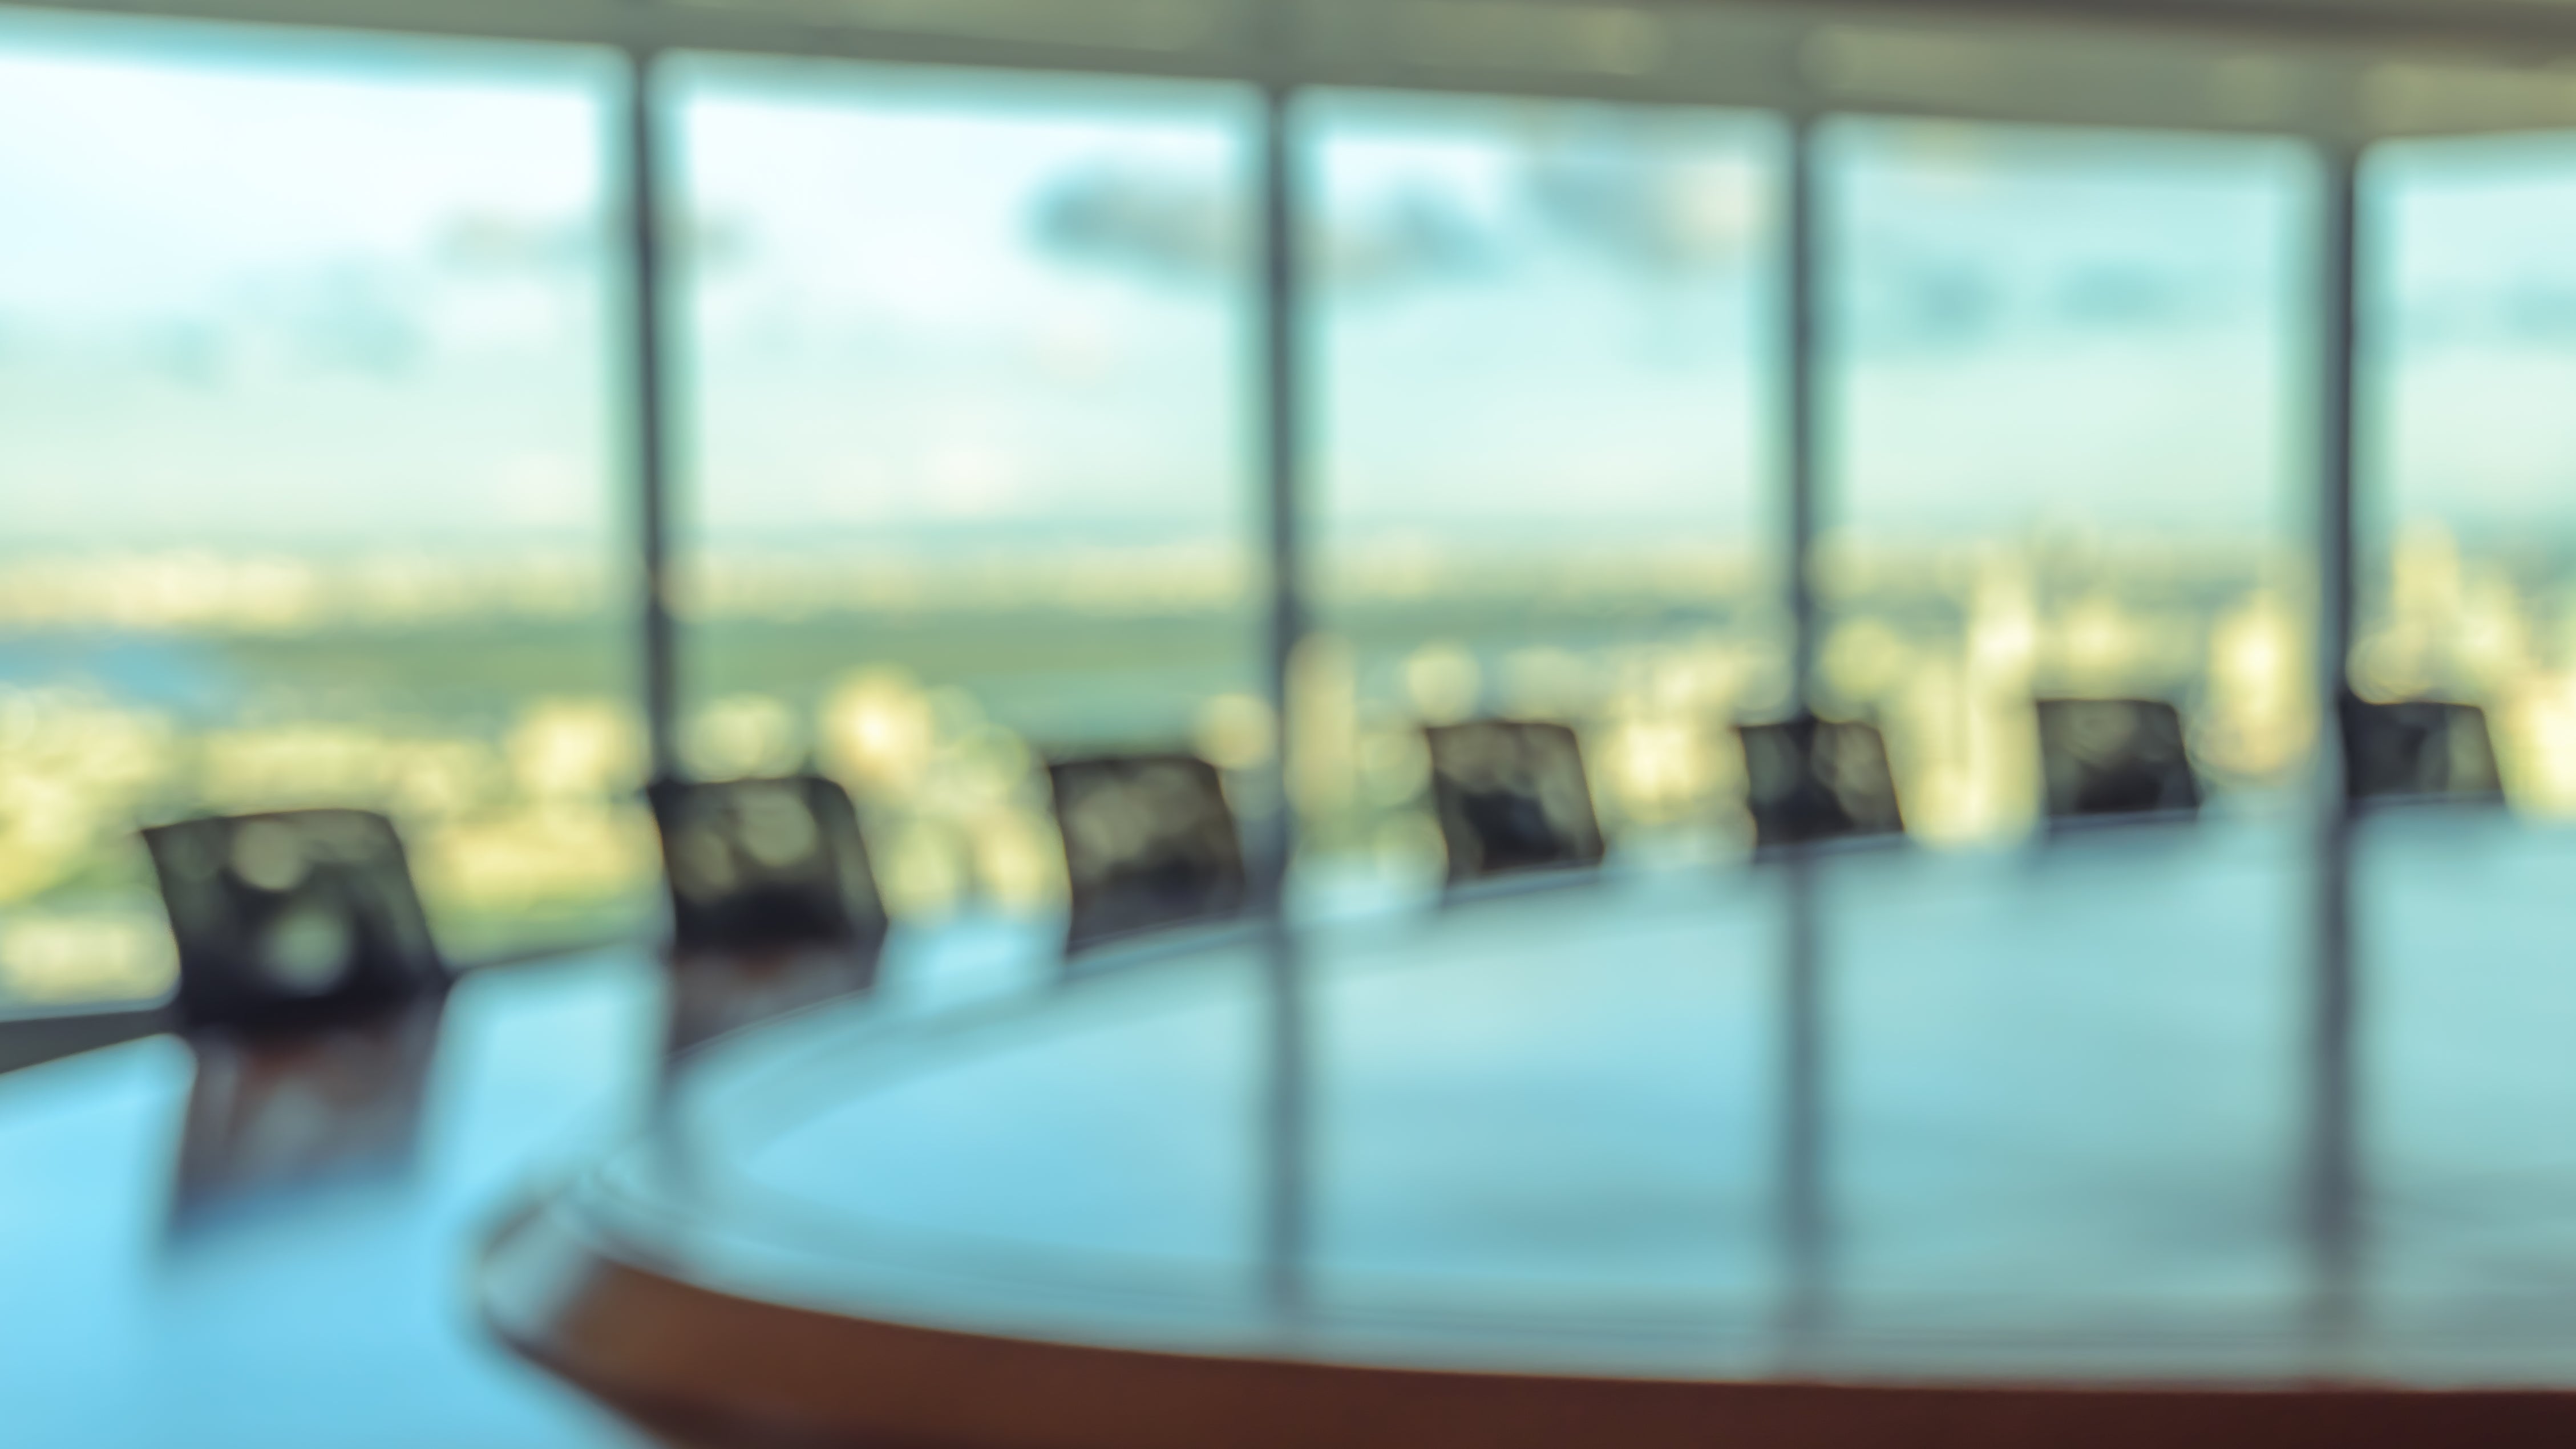 Blurred image of empty boardroom with window cityscape background.